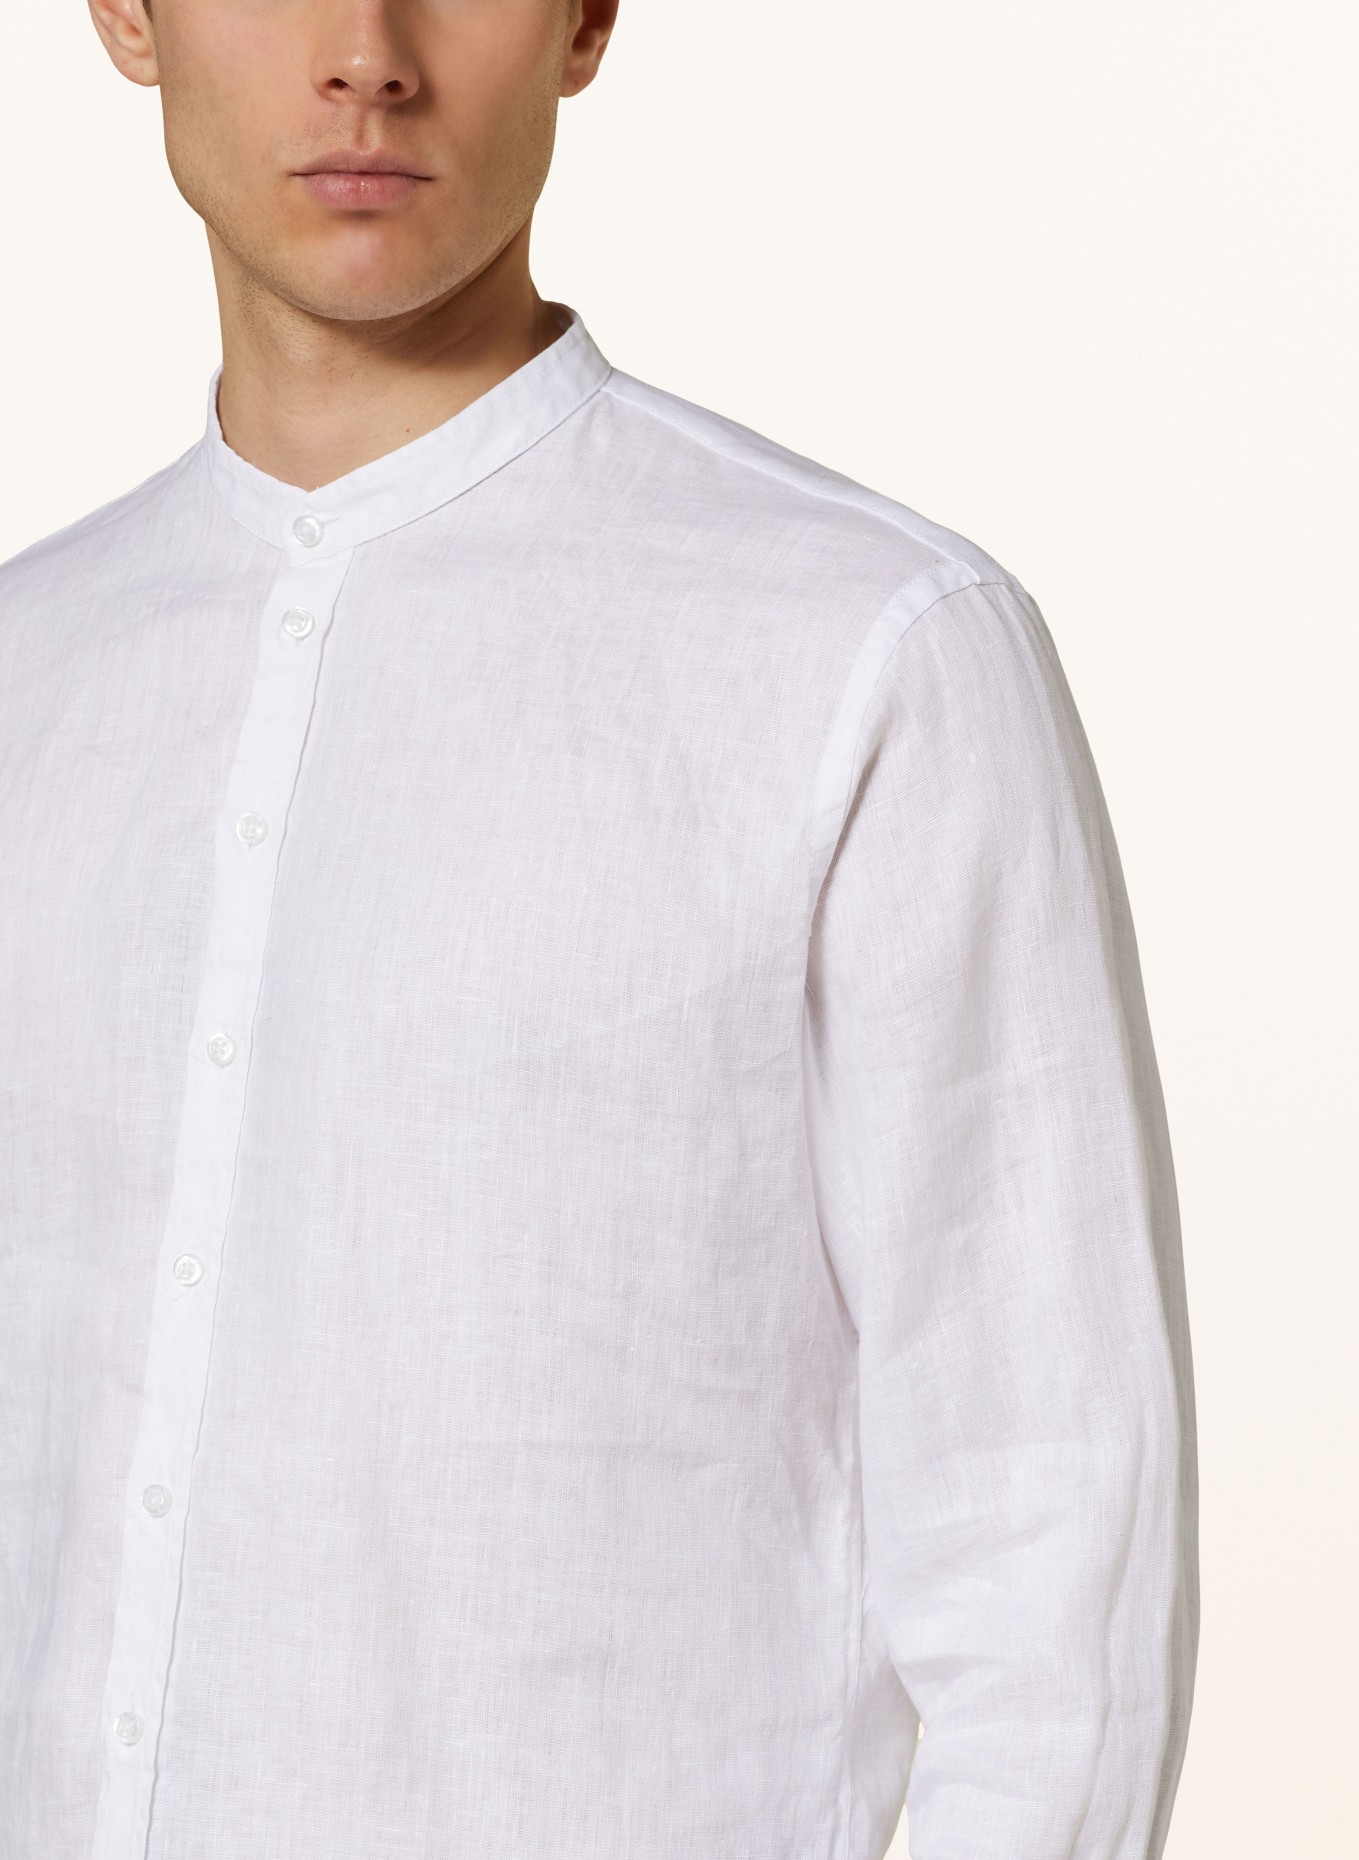 Q1 Manufaktur Linen shirt slim relaxed fit with stand-up collar, Color: WHITE (Image 4)